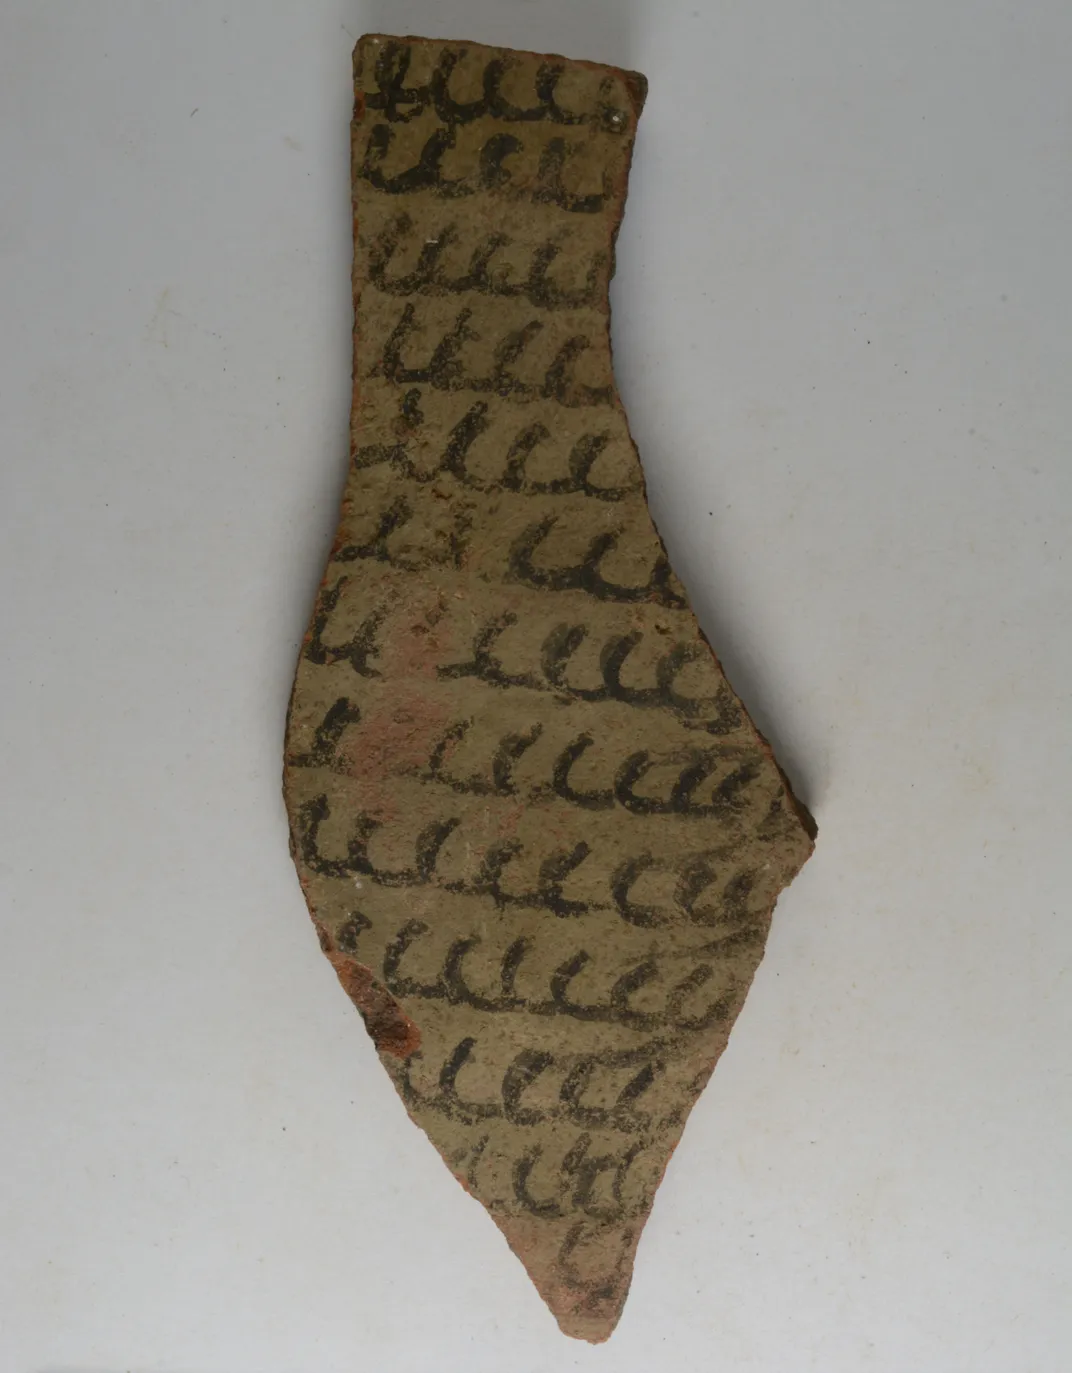 tie-shaped brown fragment with circular-like scribbles in black writing